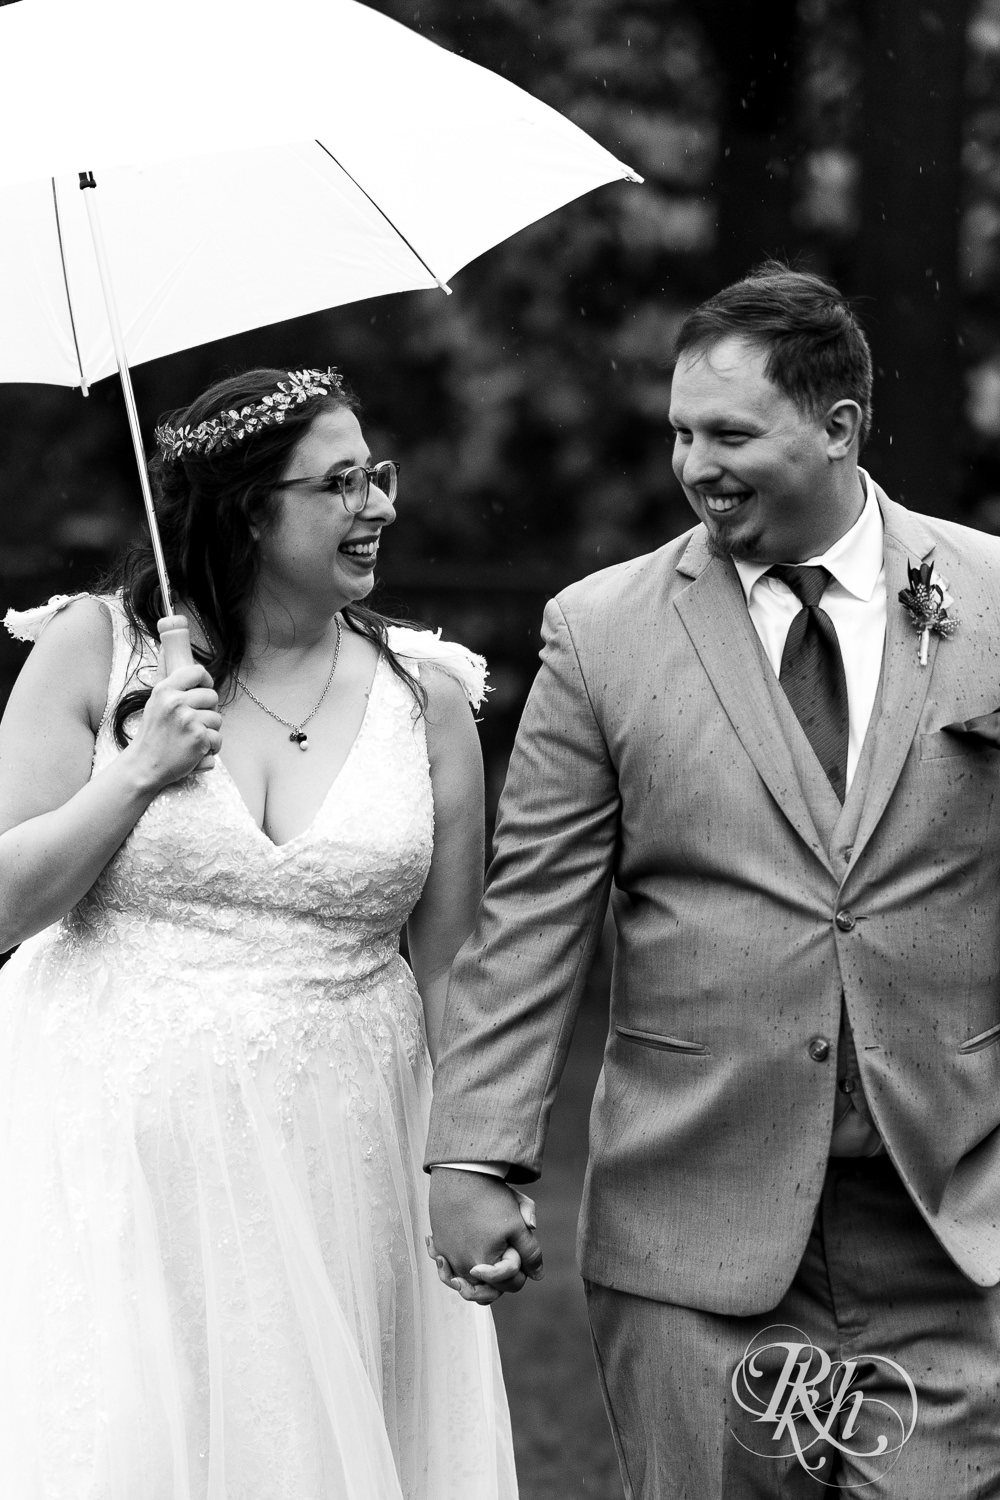 Bride and groom smile under the umbrella during rainy wedding day at Bunker Hills Event Center in Coon Rapids, Minnesota.